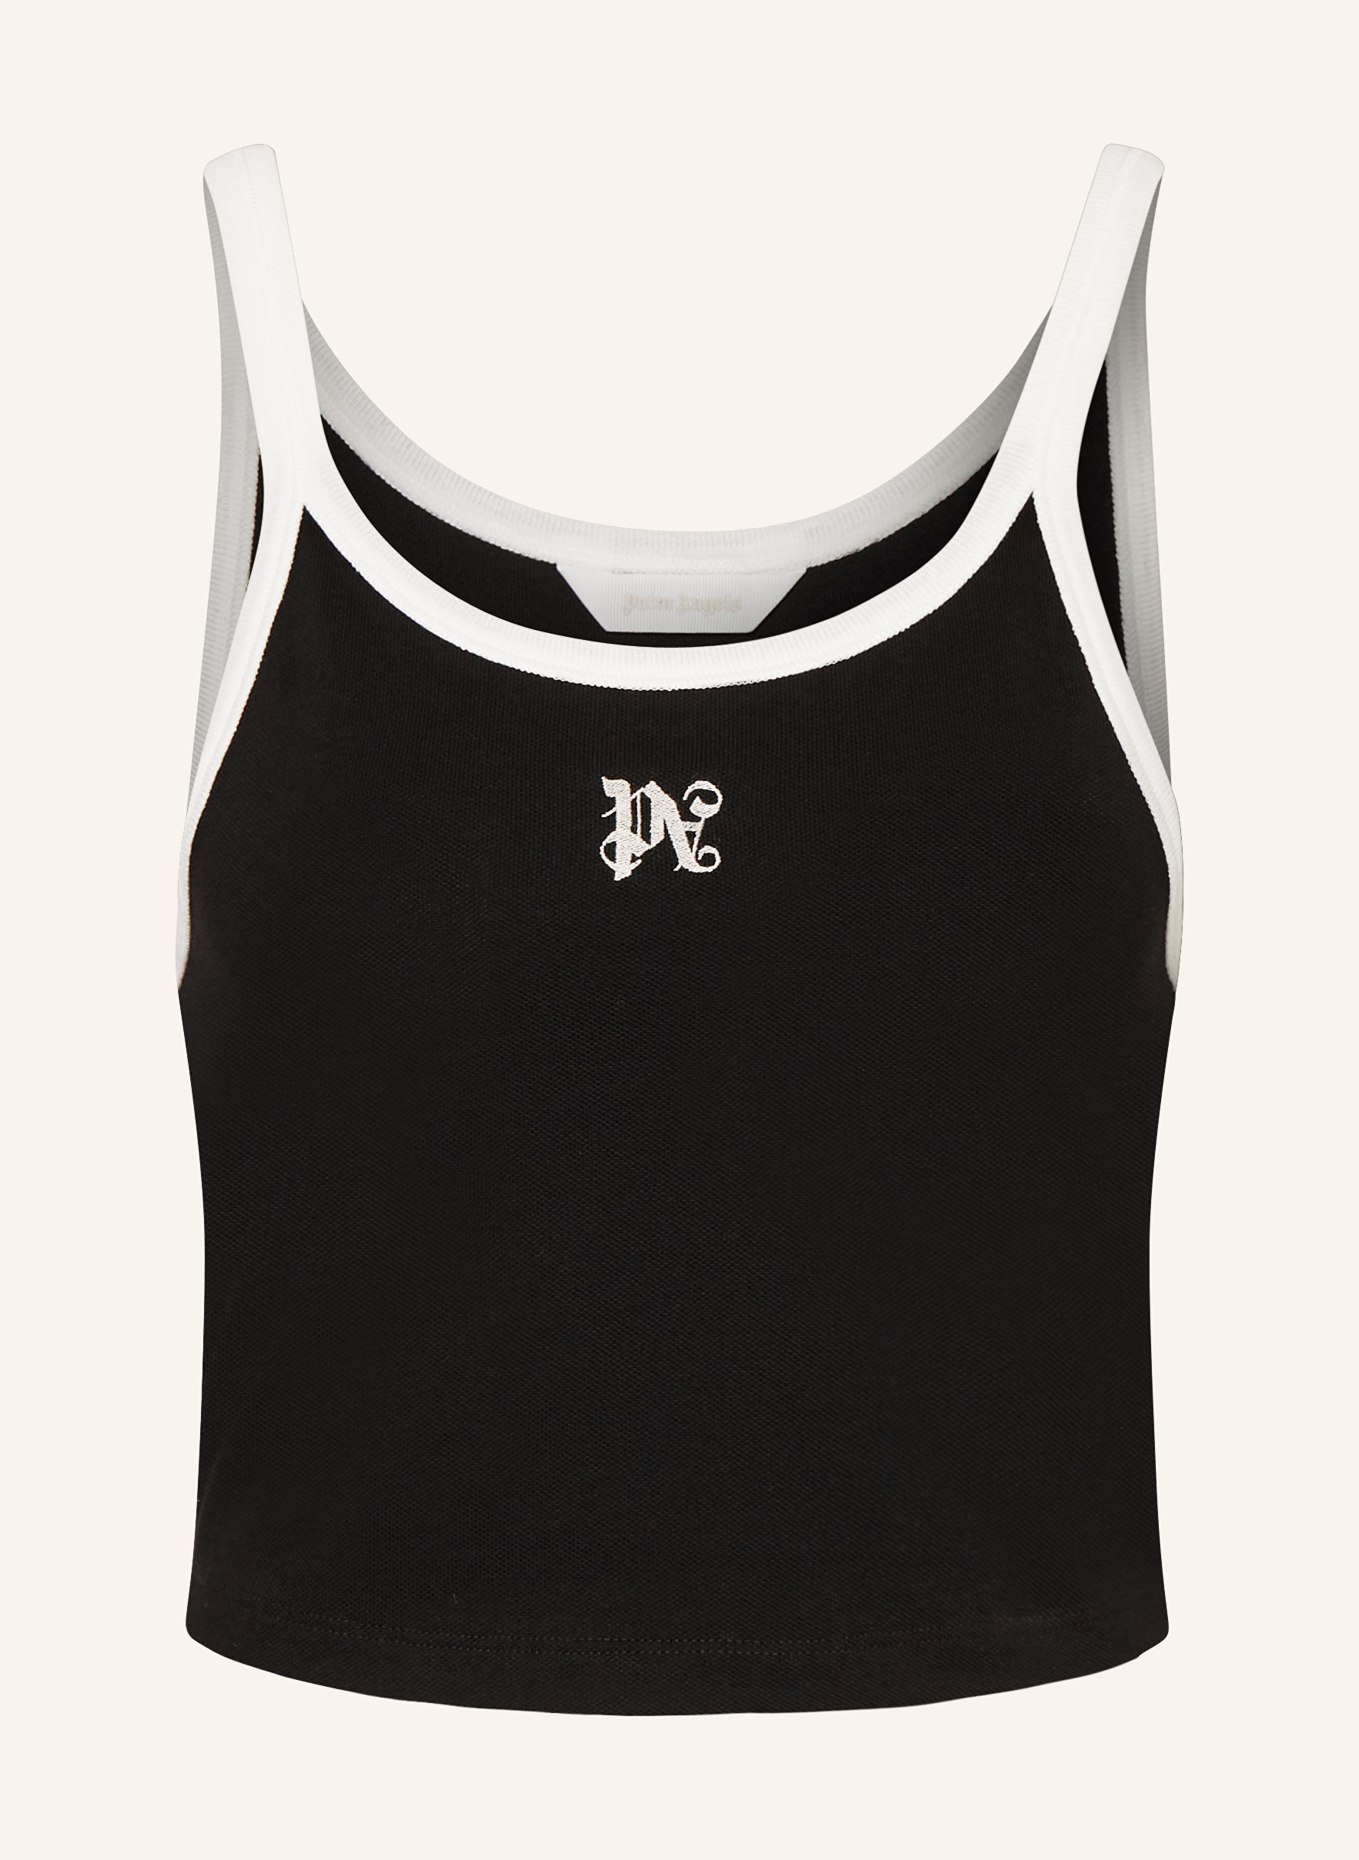 LOGO TANK TOP in black - Palm Angels® Official